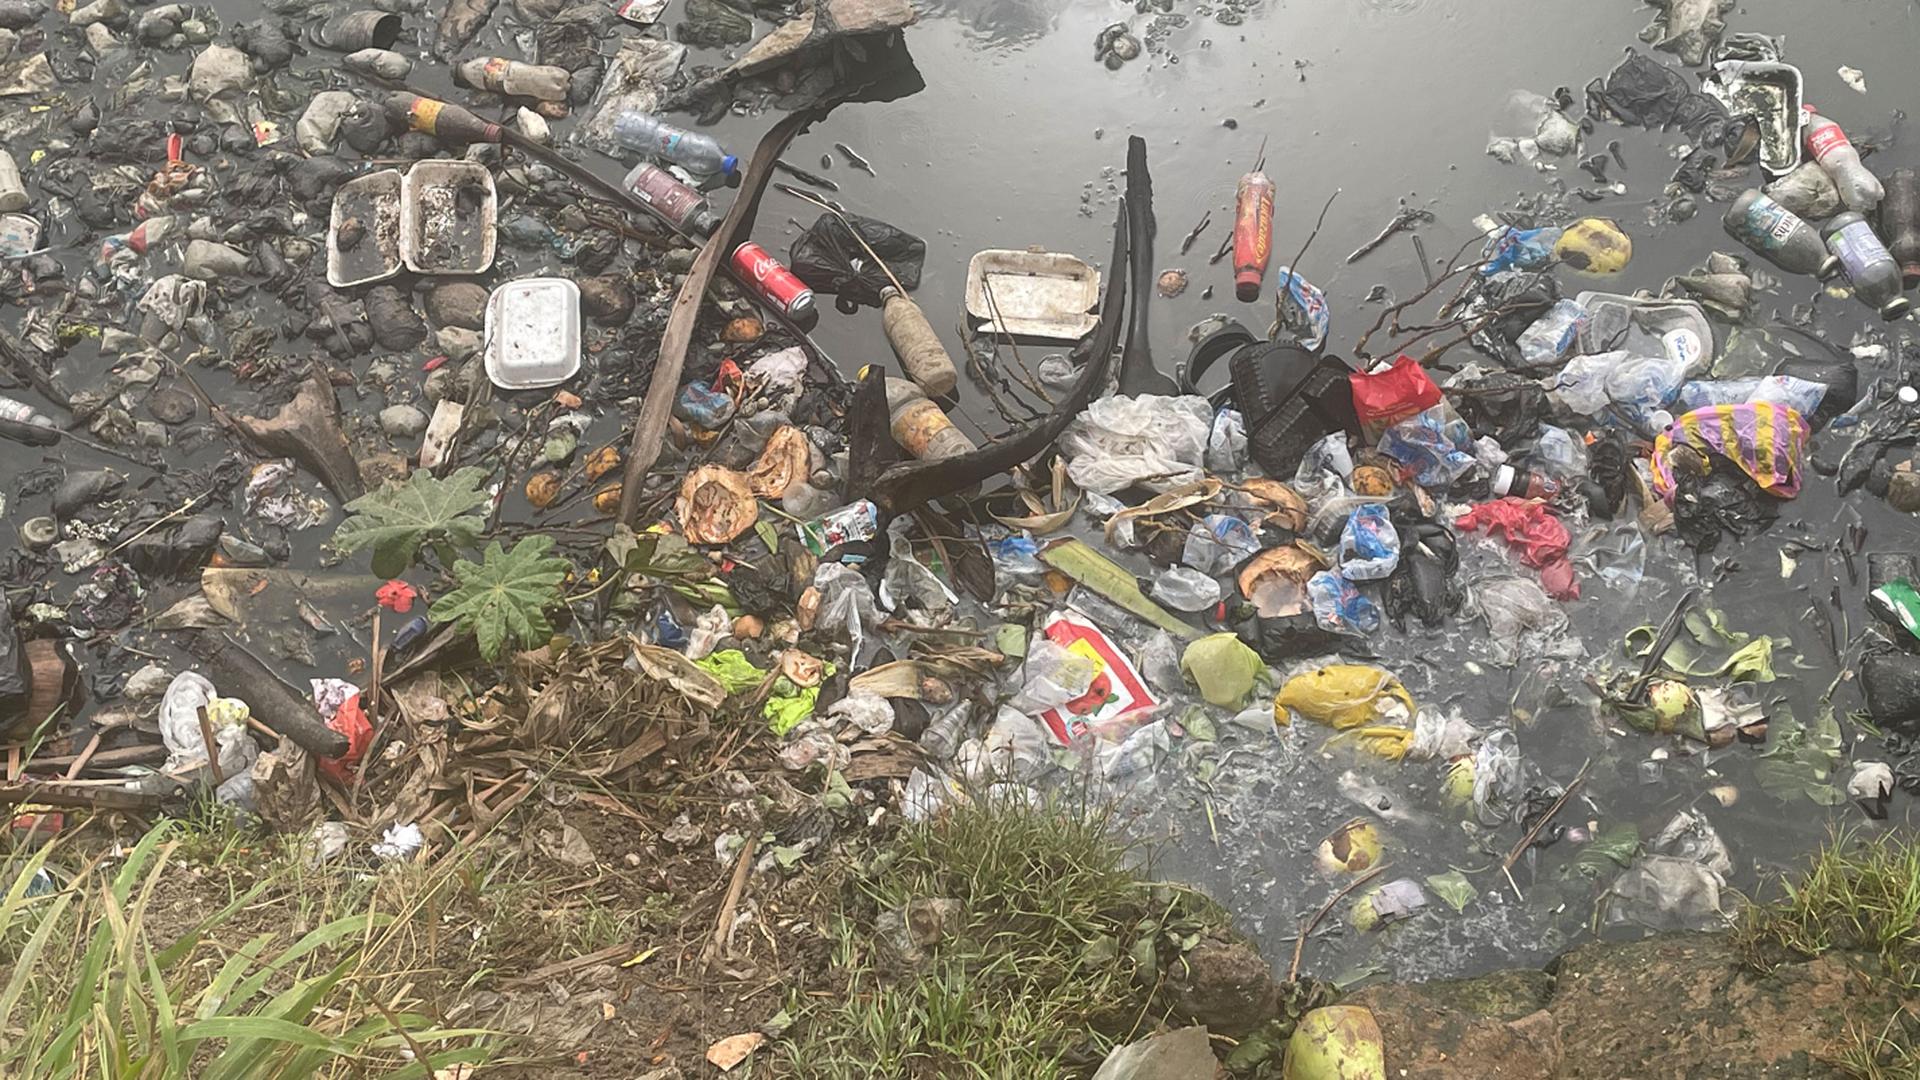 Plastic pollution has become a major concern in Ghana.